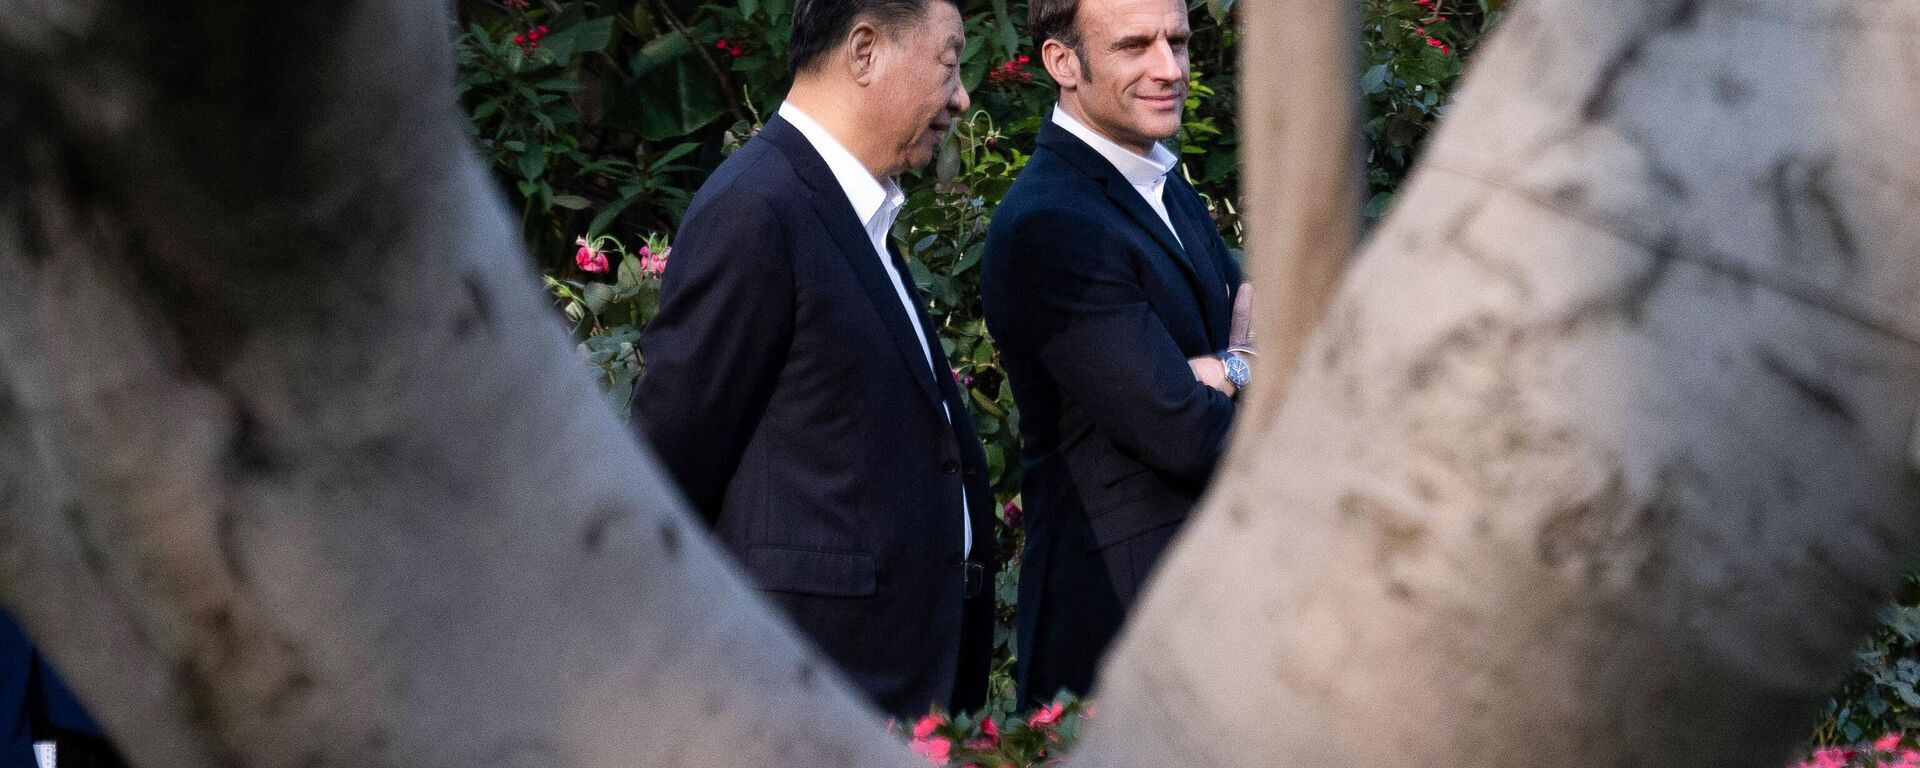 Chinese President Xi Jinping (L) and French President Emmanuel Macron walk in the garden of the residence of the Governor of Guangdong, on April 7, 2023, where Chinese President XI Jinping's father, XI Zhongxun lived. - Sputnik International, 1920, 20.04.2023